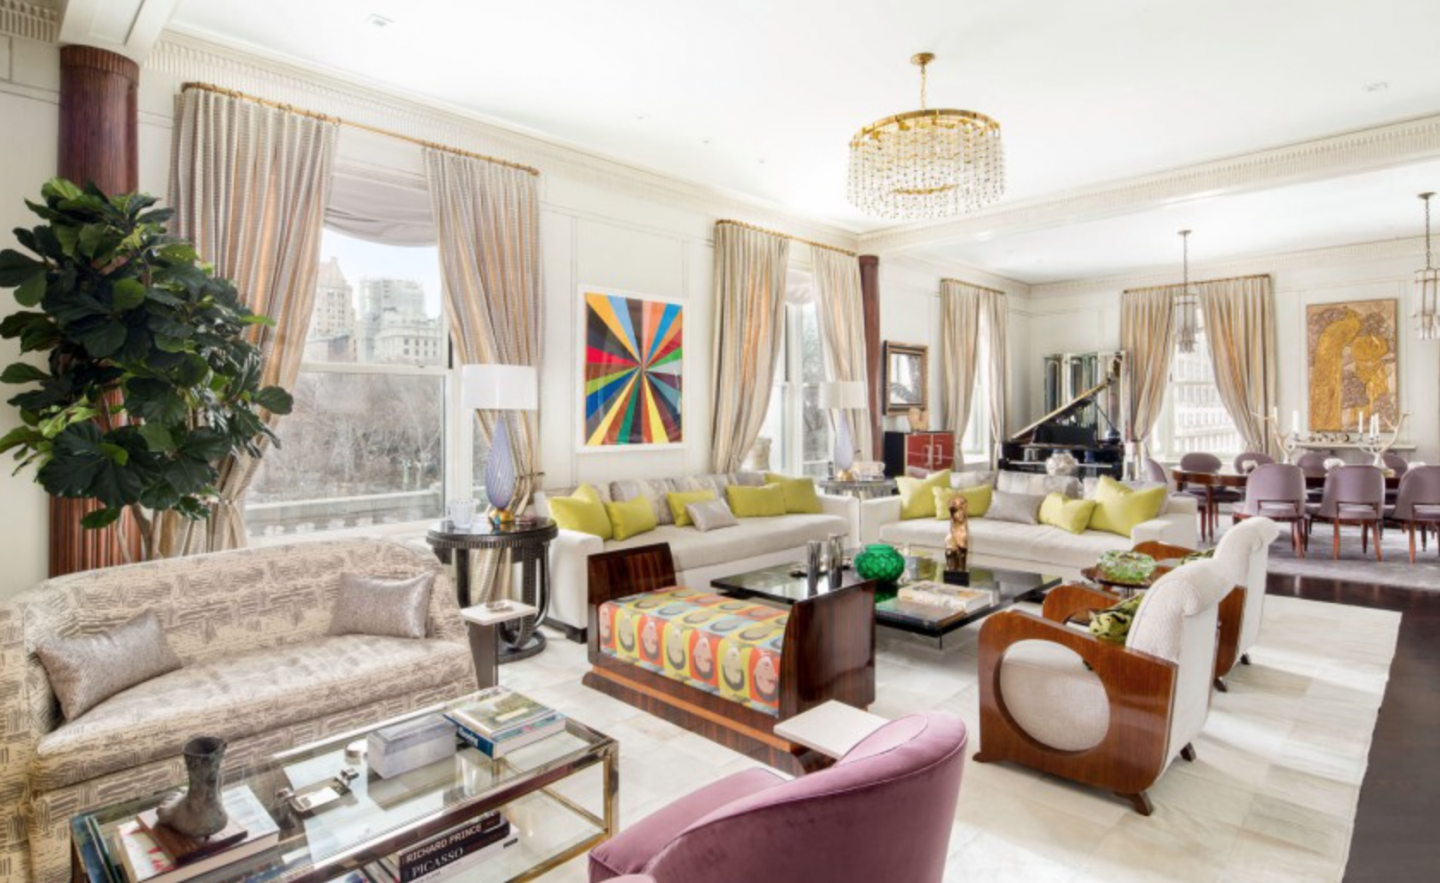 The 4,000-square-foot apartment offers 4 bedrooms, 13-foot ceilings and great views of Central Park.